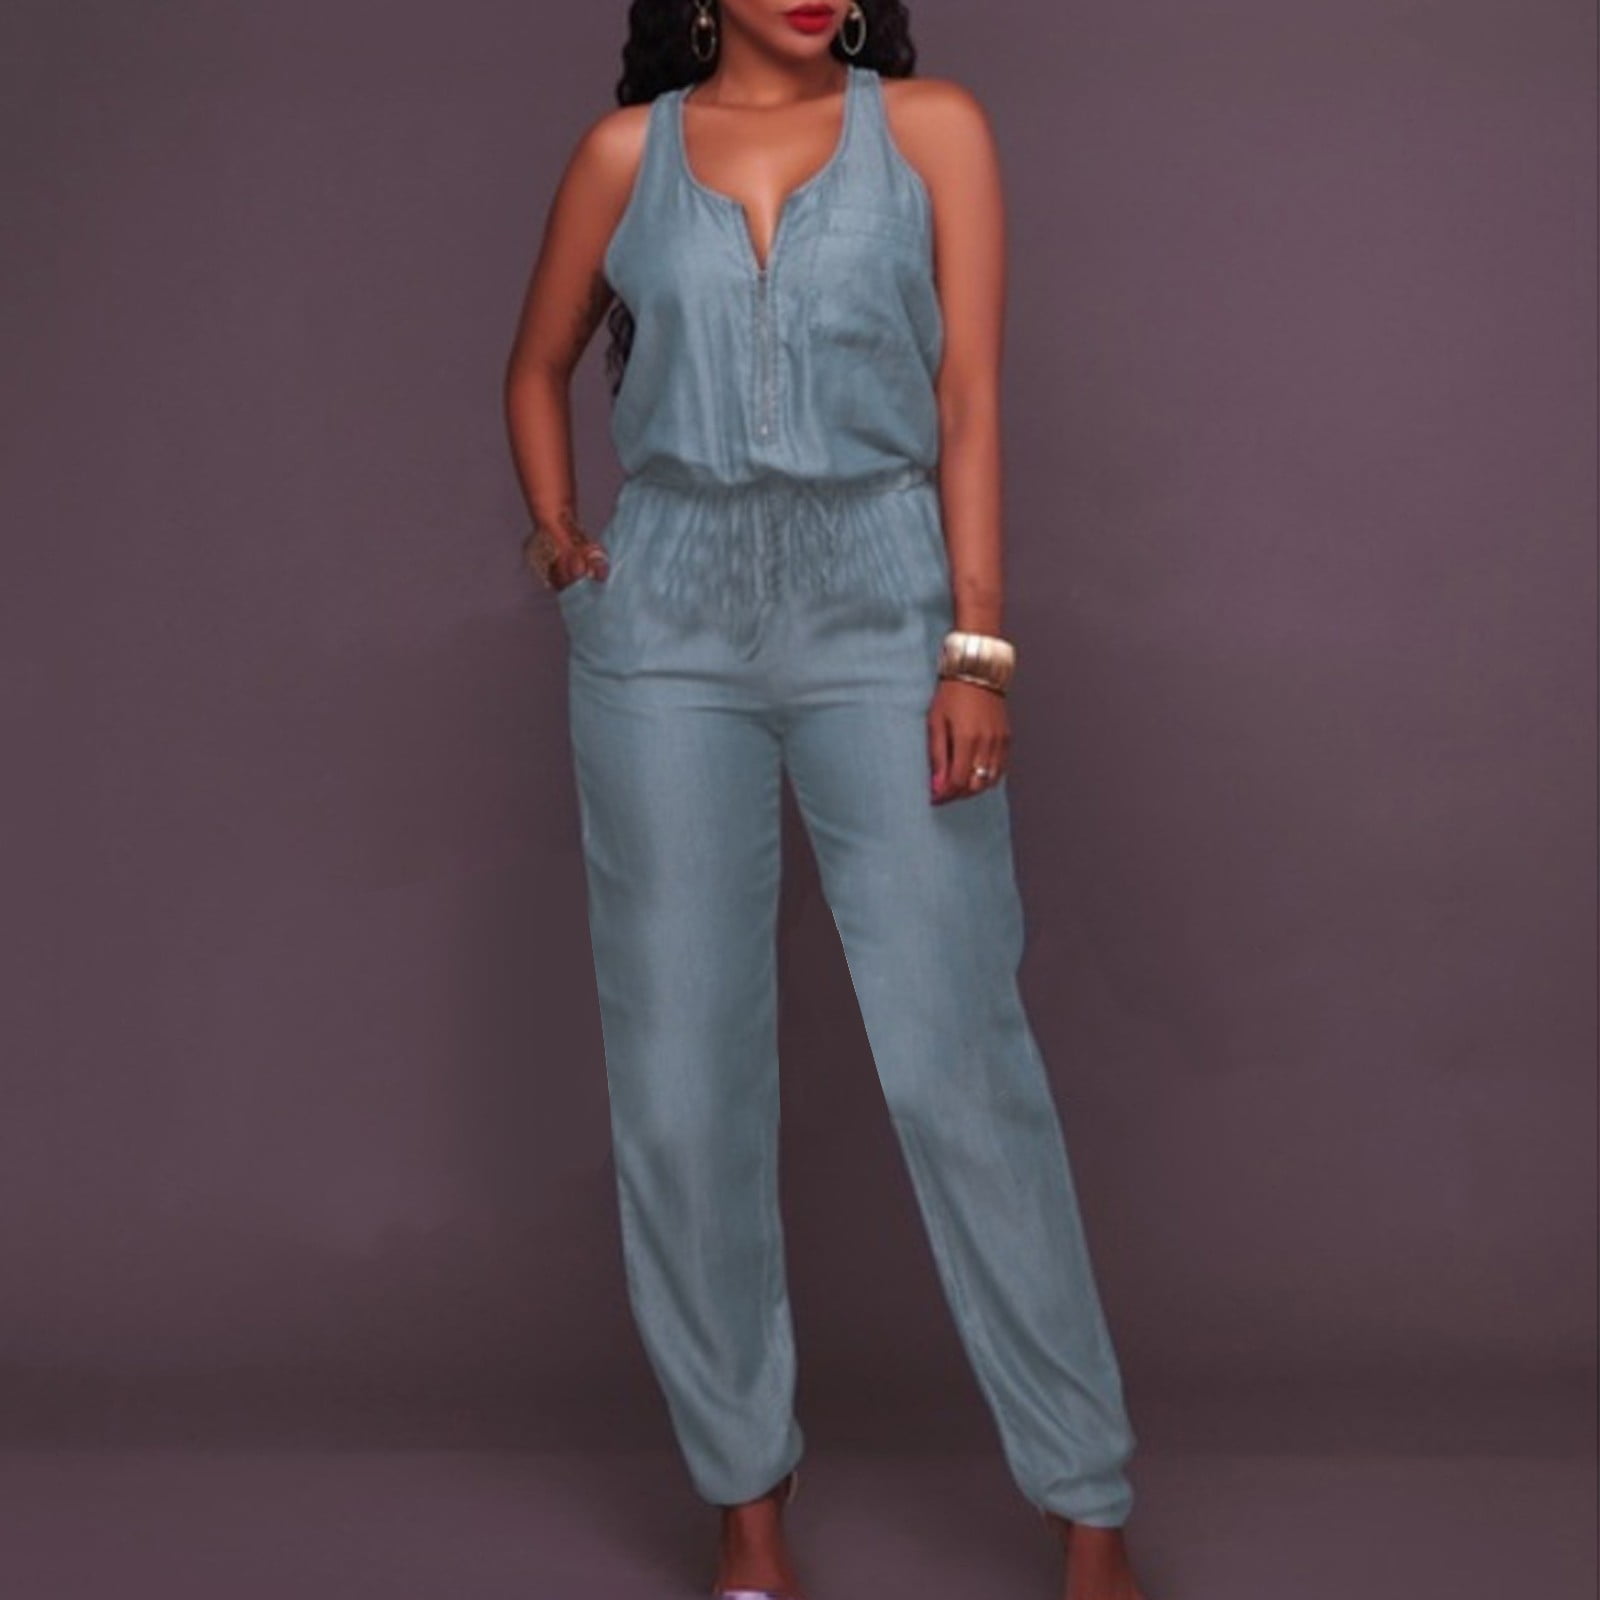 yoeyez Womens Jumpsuits and Rompers Womens Casual Off Shoulder Denim Jeans Pocket Sleeveless Jumpsuits Rompers Monos, Mamelucos Y Overoles Para Mujer Walmart.com